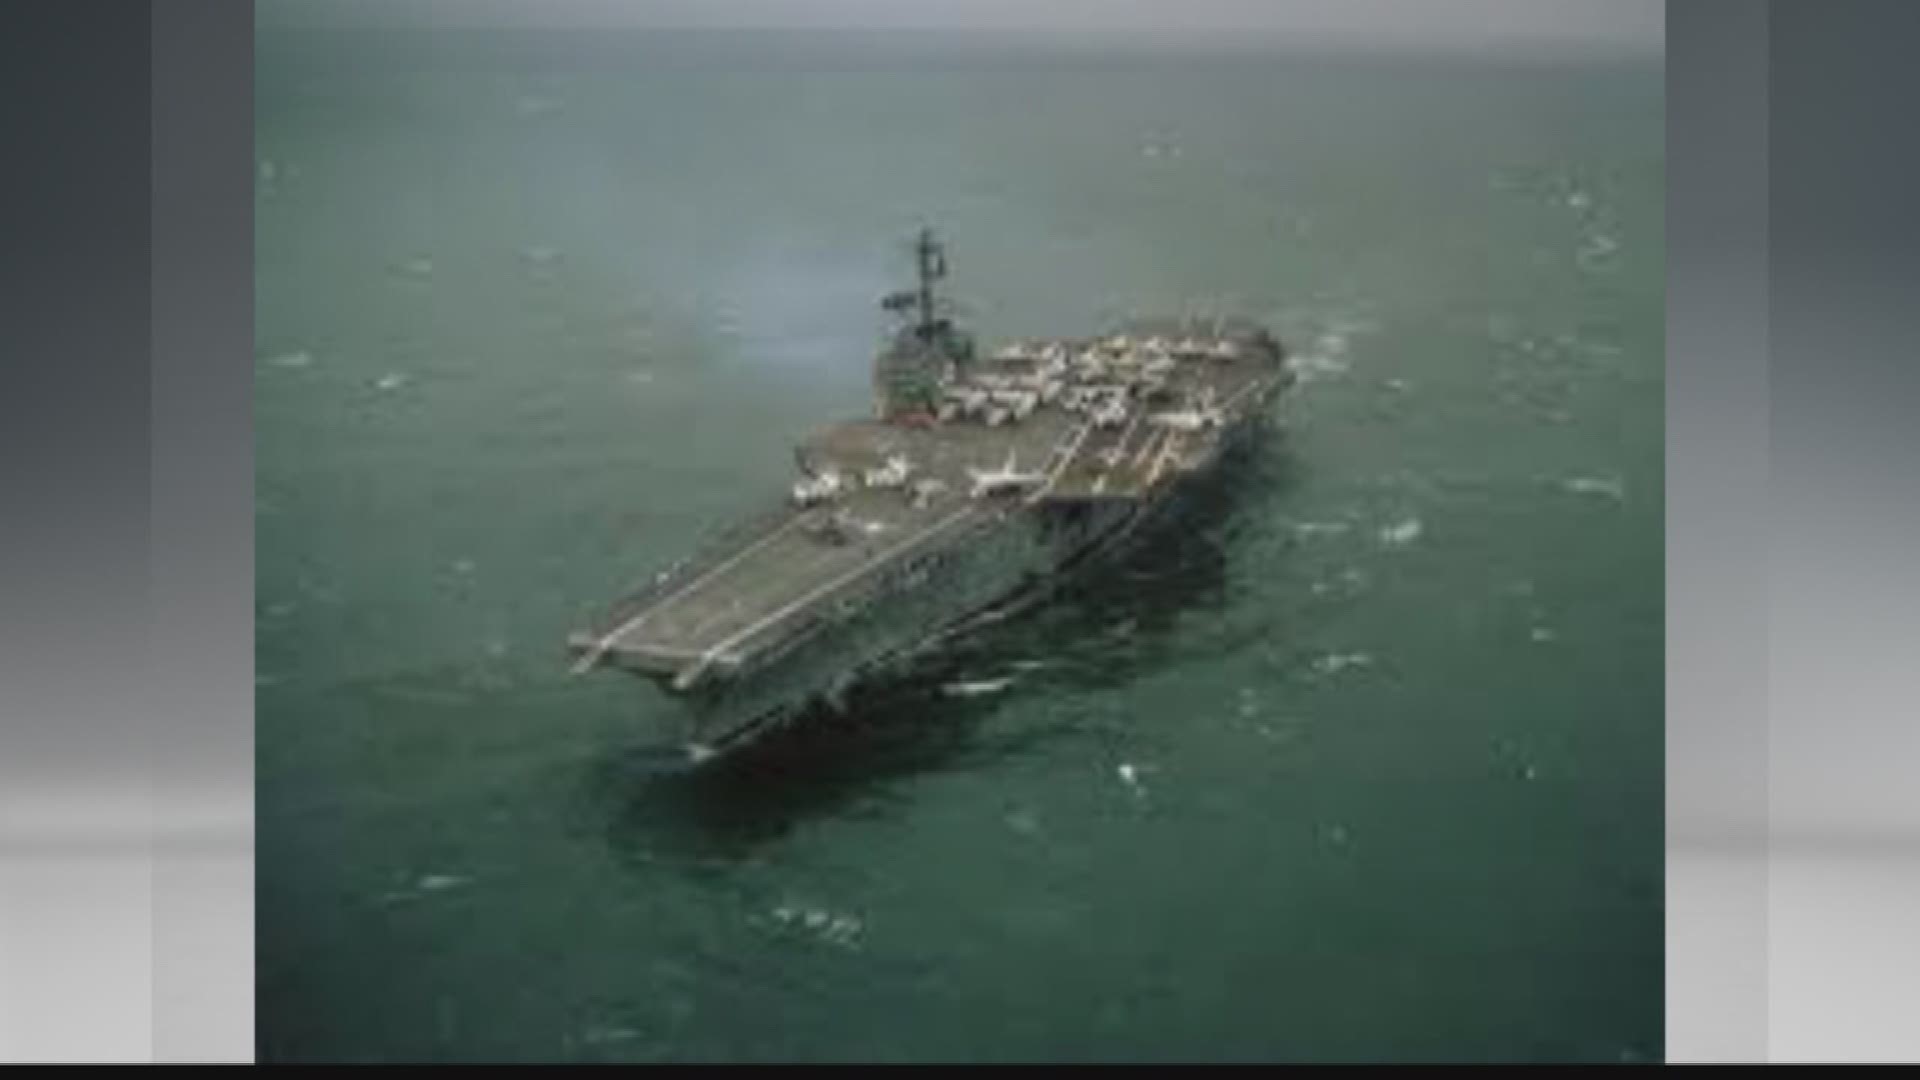 13News Now Mike Gooding spoke with former sailors, marines about the USS Forrestal fire that took the lives 134 people.